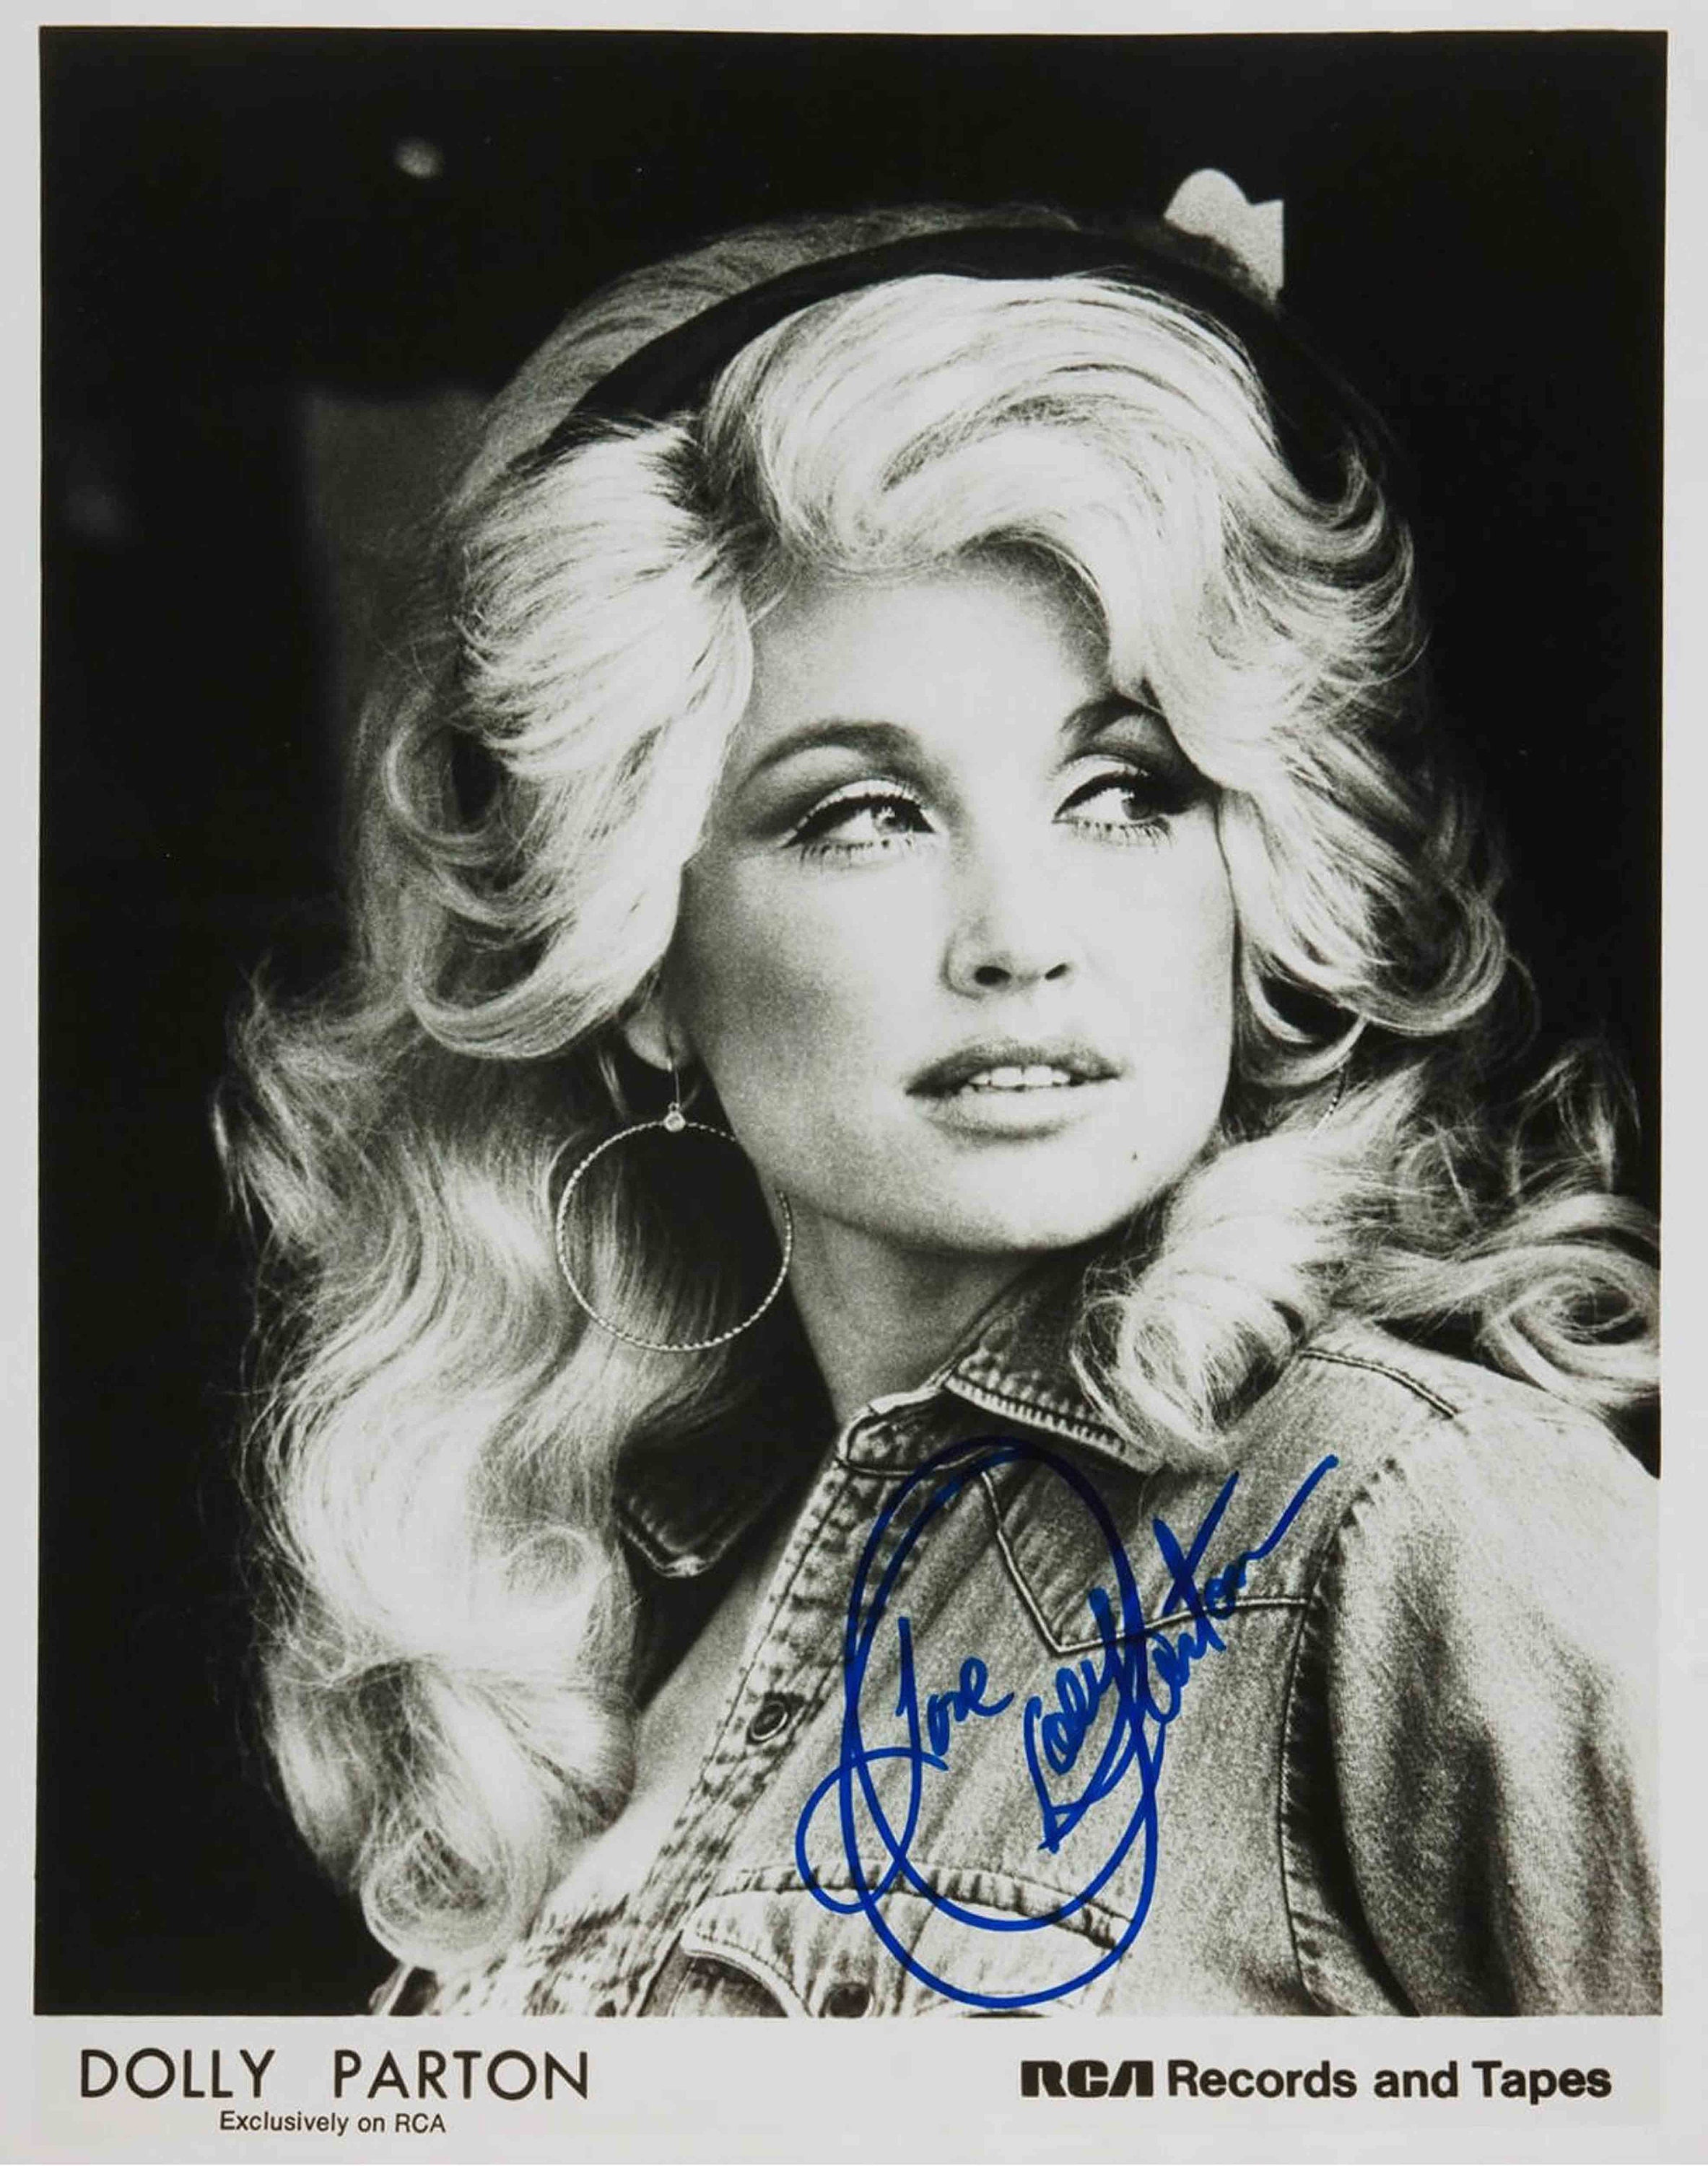 DOLLY PARTON AUTOGRAPHED SIGNED A4 PP POSTER PHOTO PRINT 6 